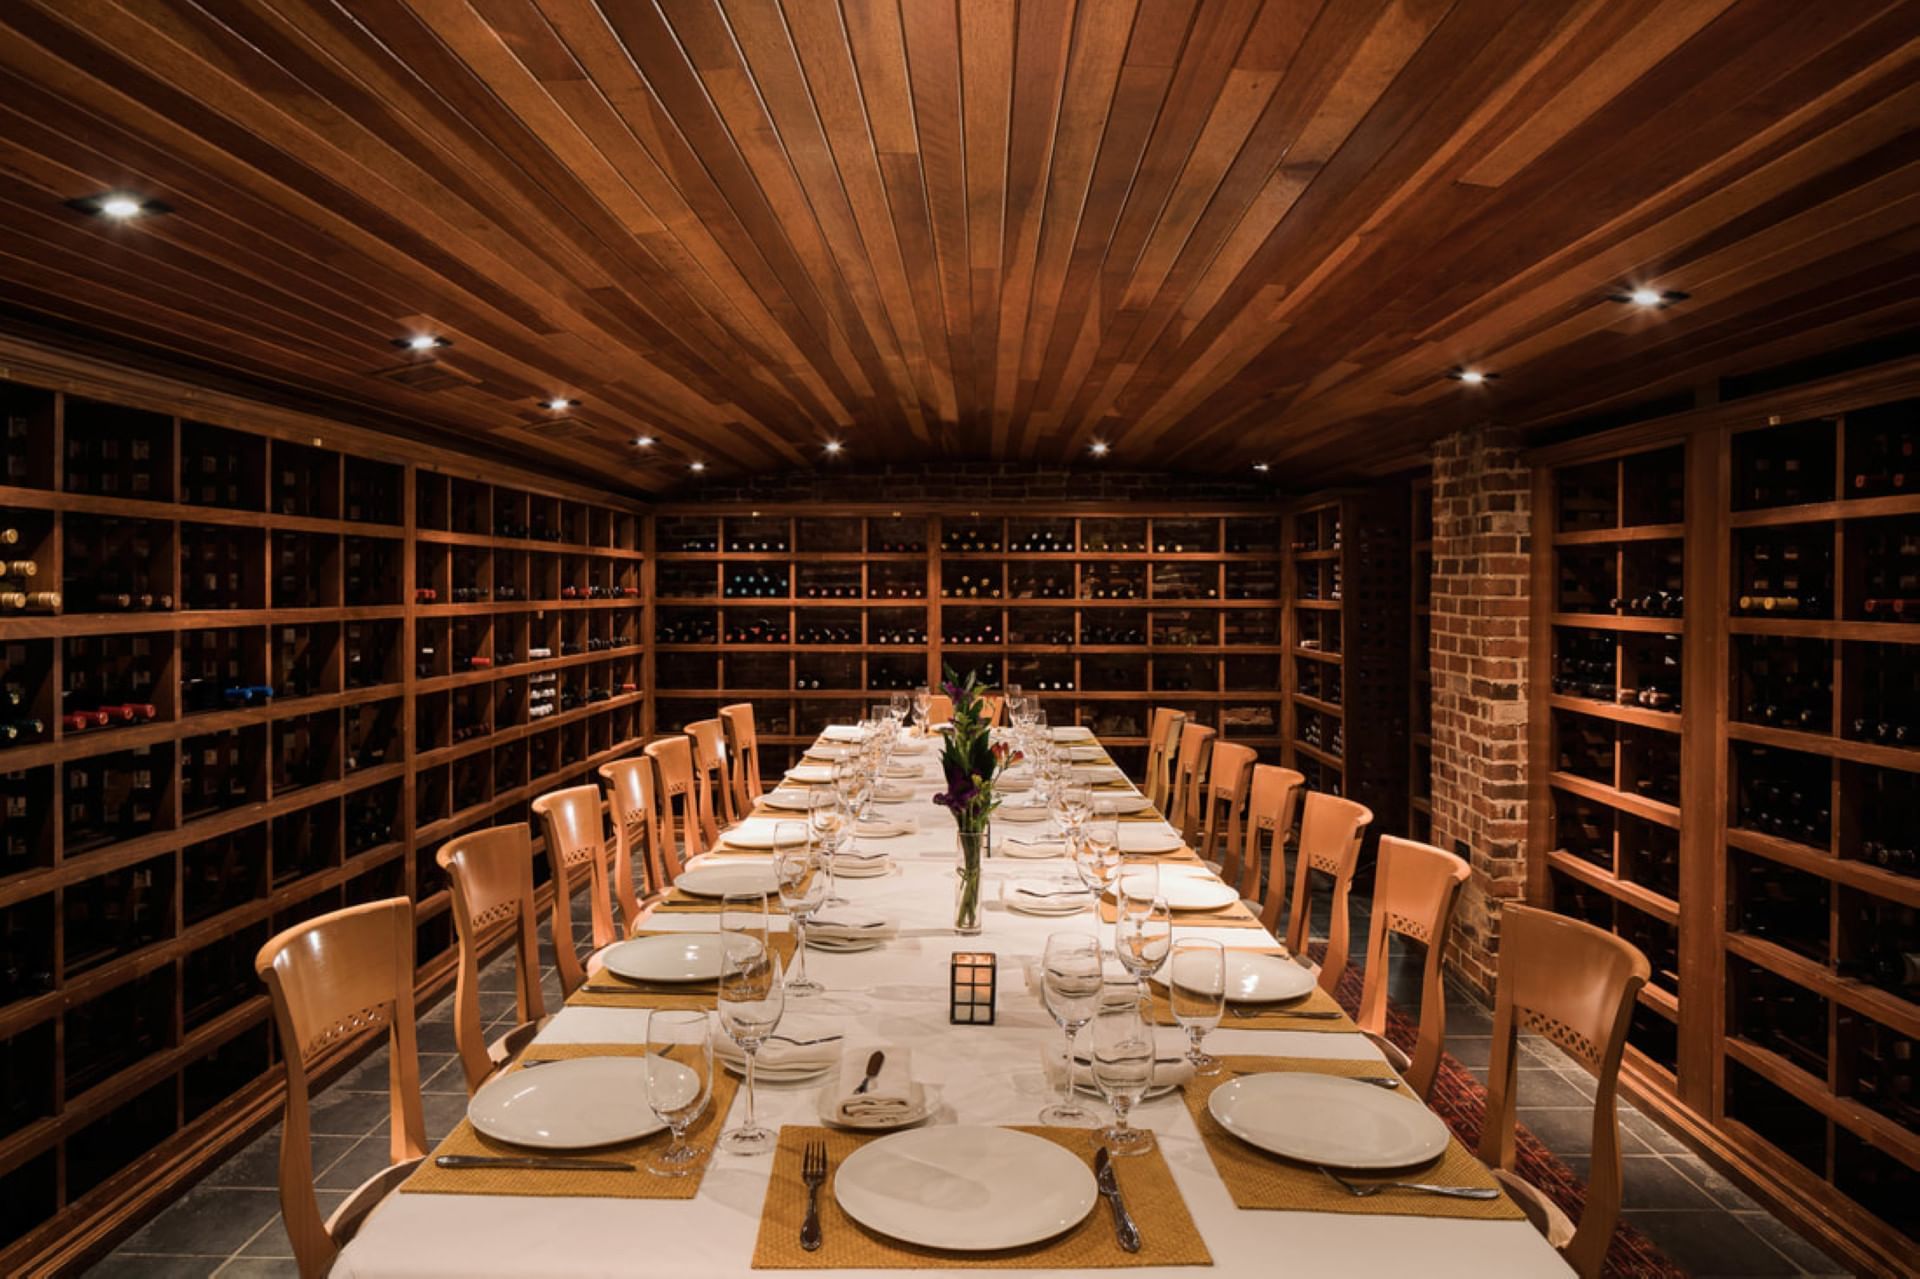 Dining table in Wine Cellar arranged with glassware & cutlery, surrounded by bar shelves at The Clifton